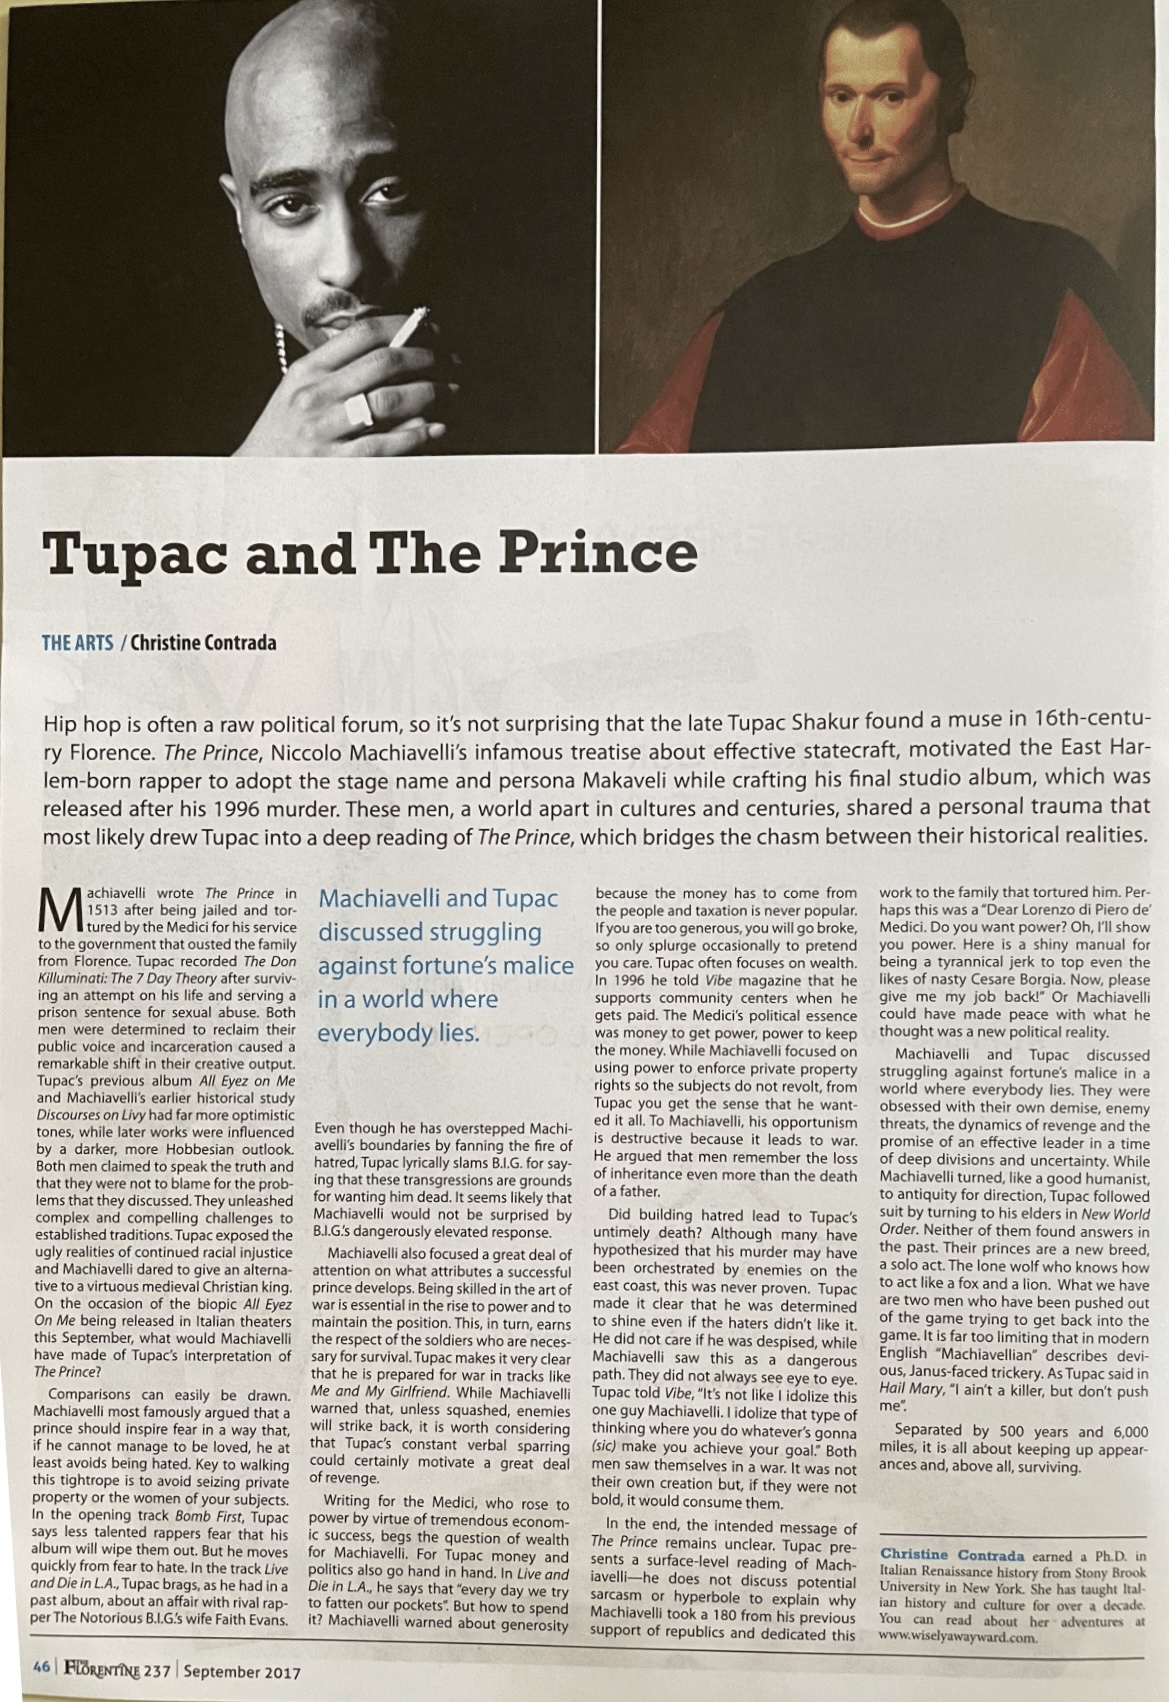 Tupac and the Prince